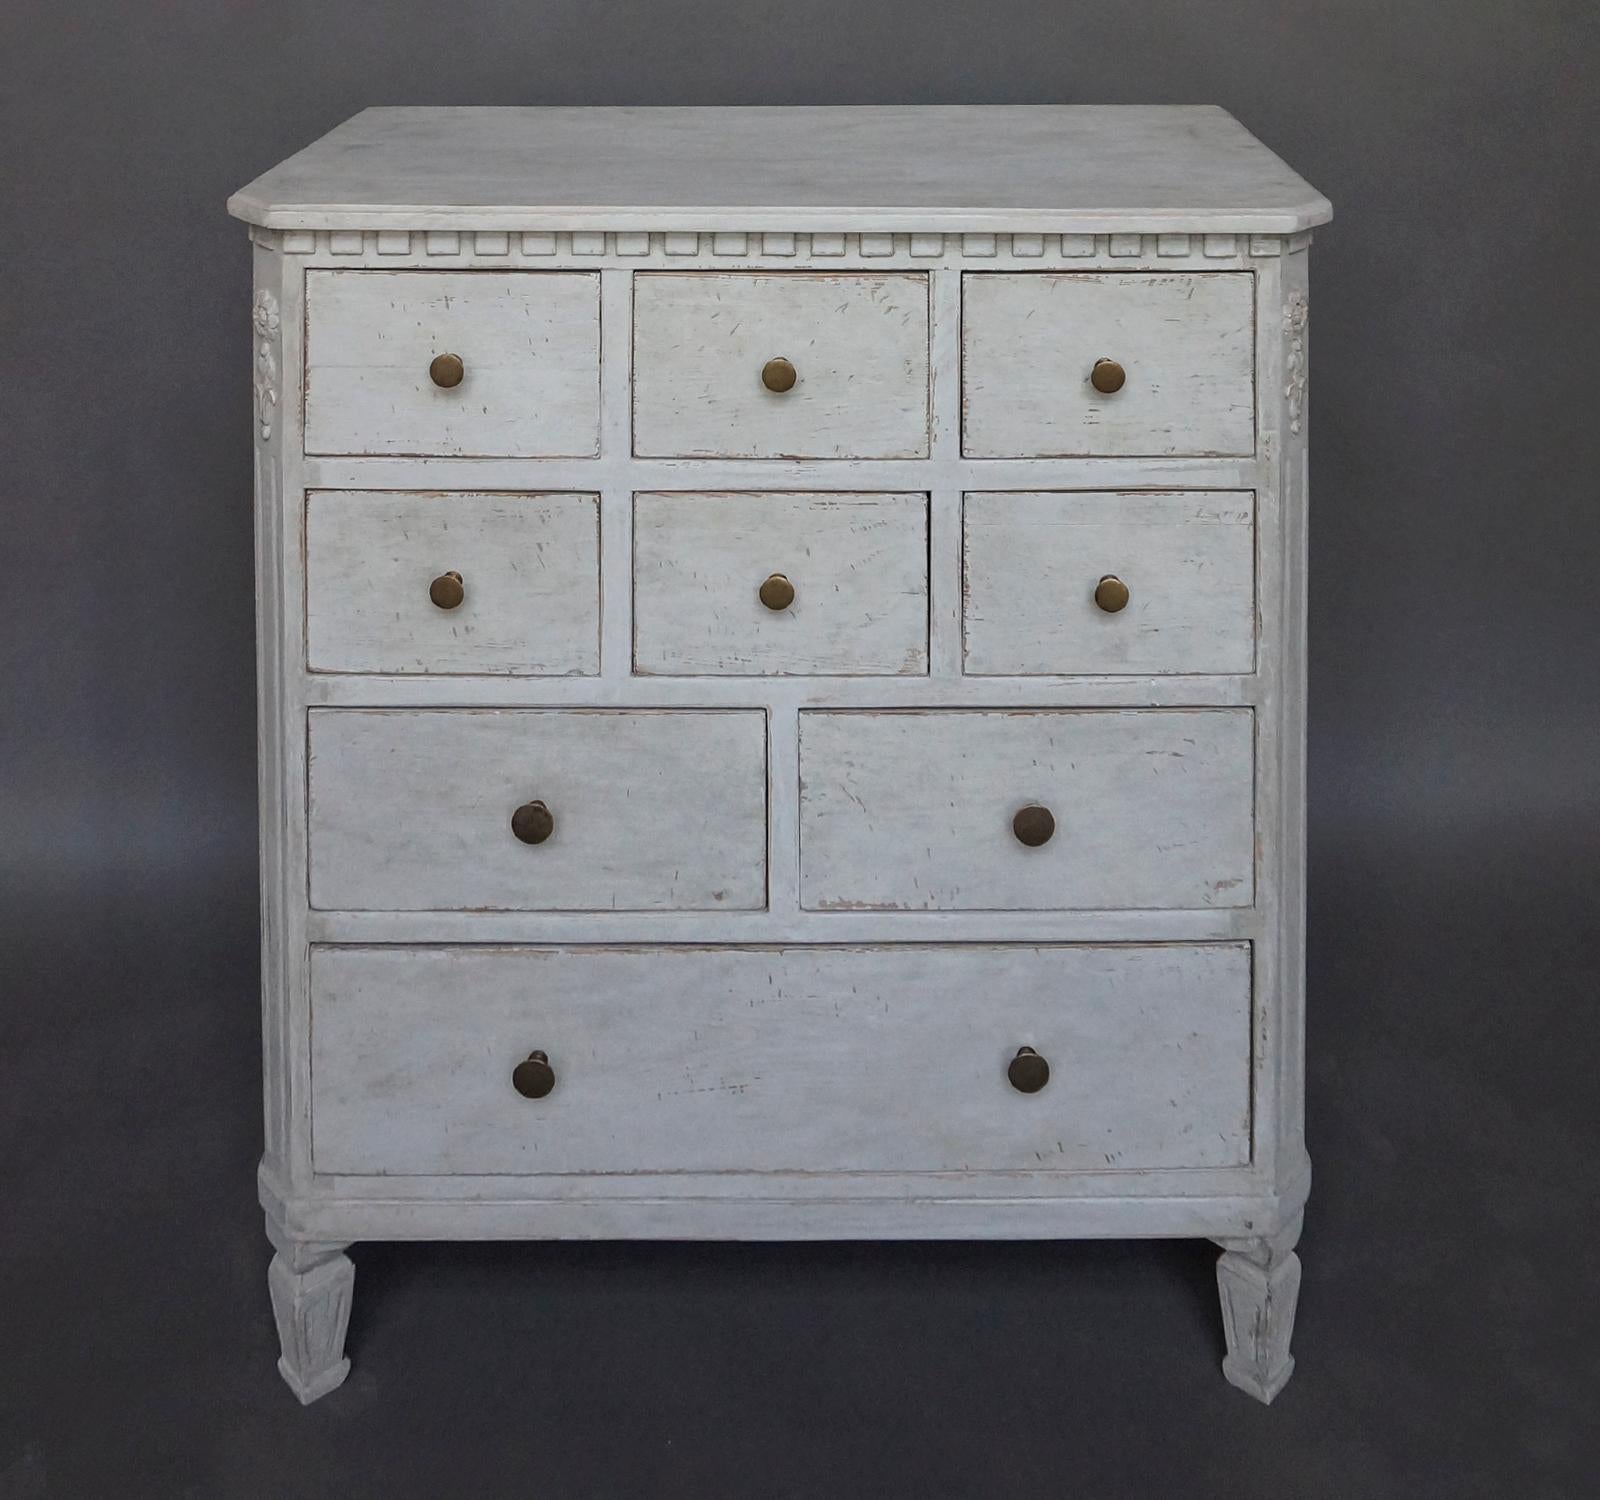 Period apothecary chest with Gustavian detail, Sweden, circa 1820. Shaped top over dentil molding and canted corners with applied rosettes and foliage. Four rows of drawers with brass pulls, all supported by tapering square feet. No repairs.